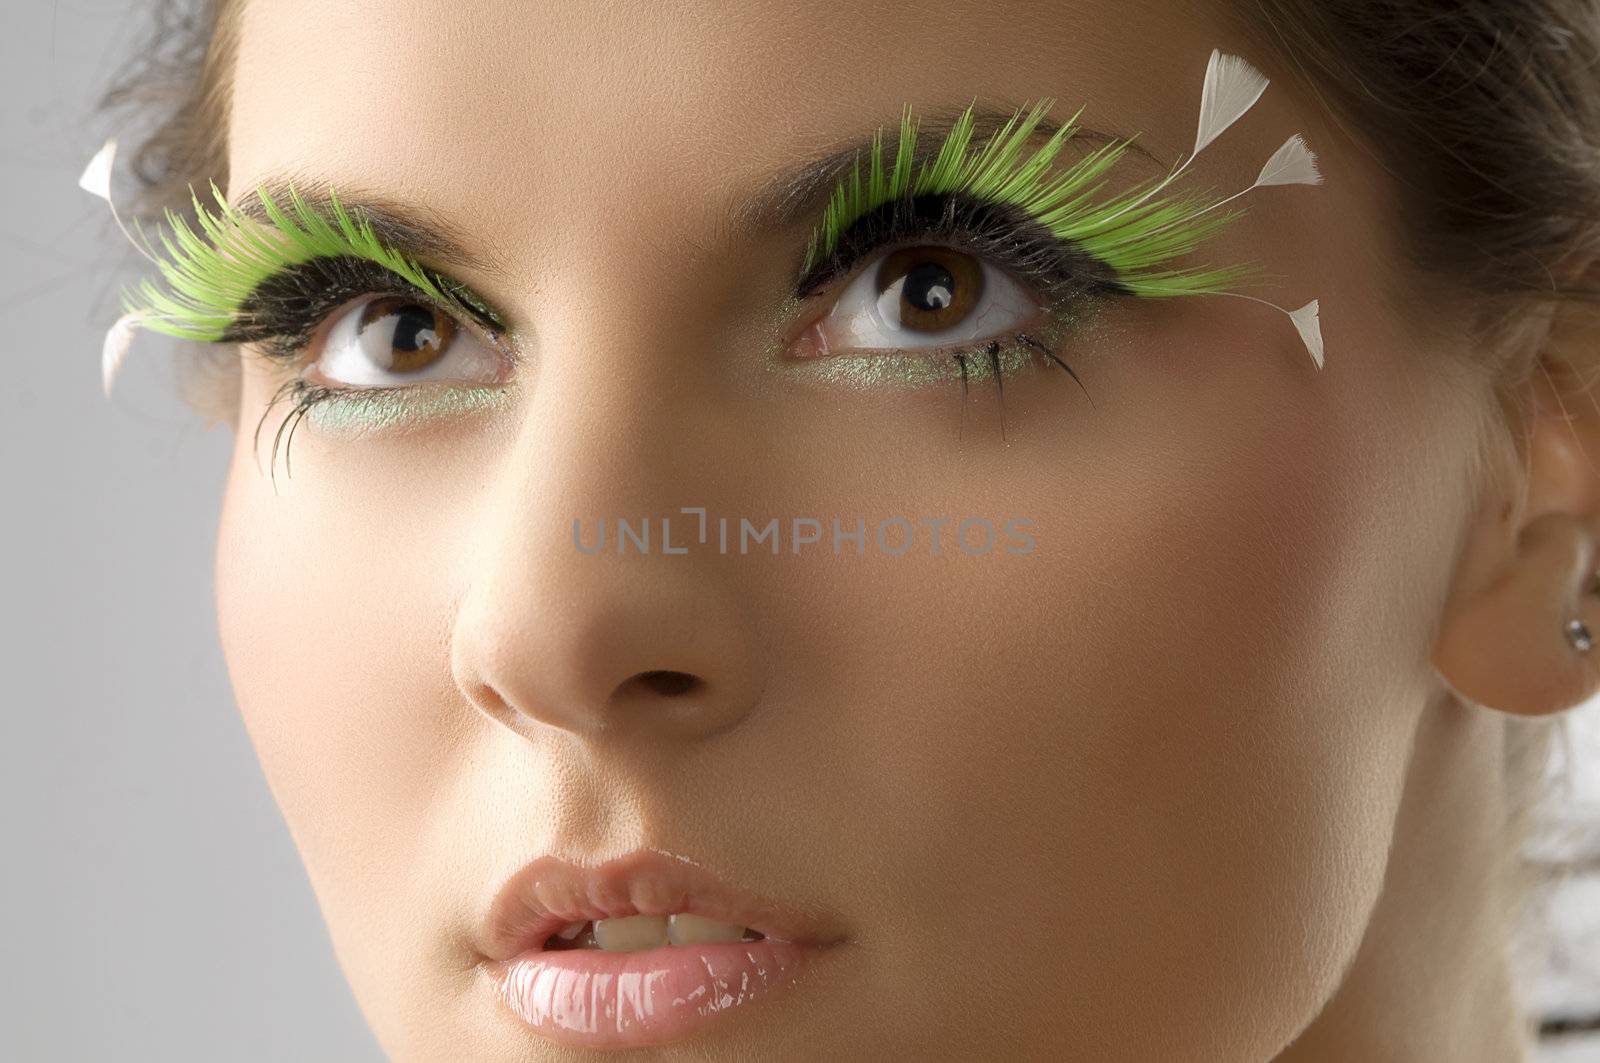 cute portrait of a young beautiful woman with artificial green eyelashes